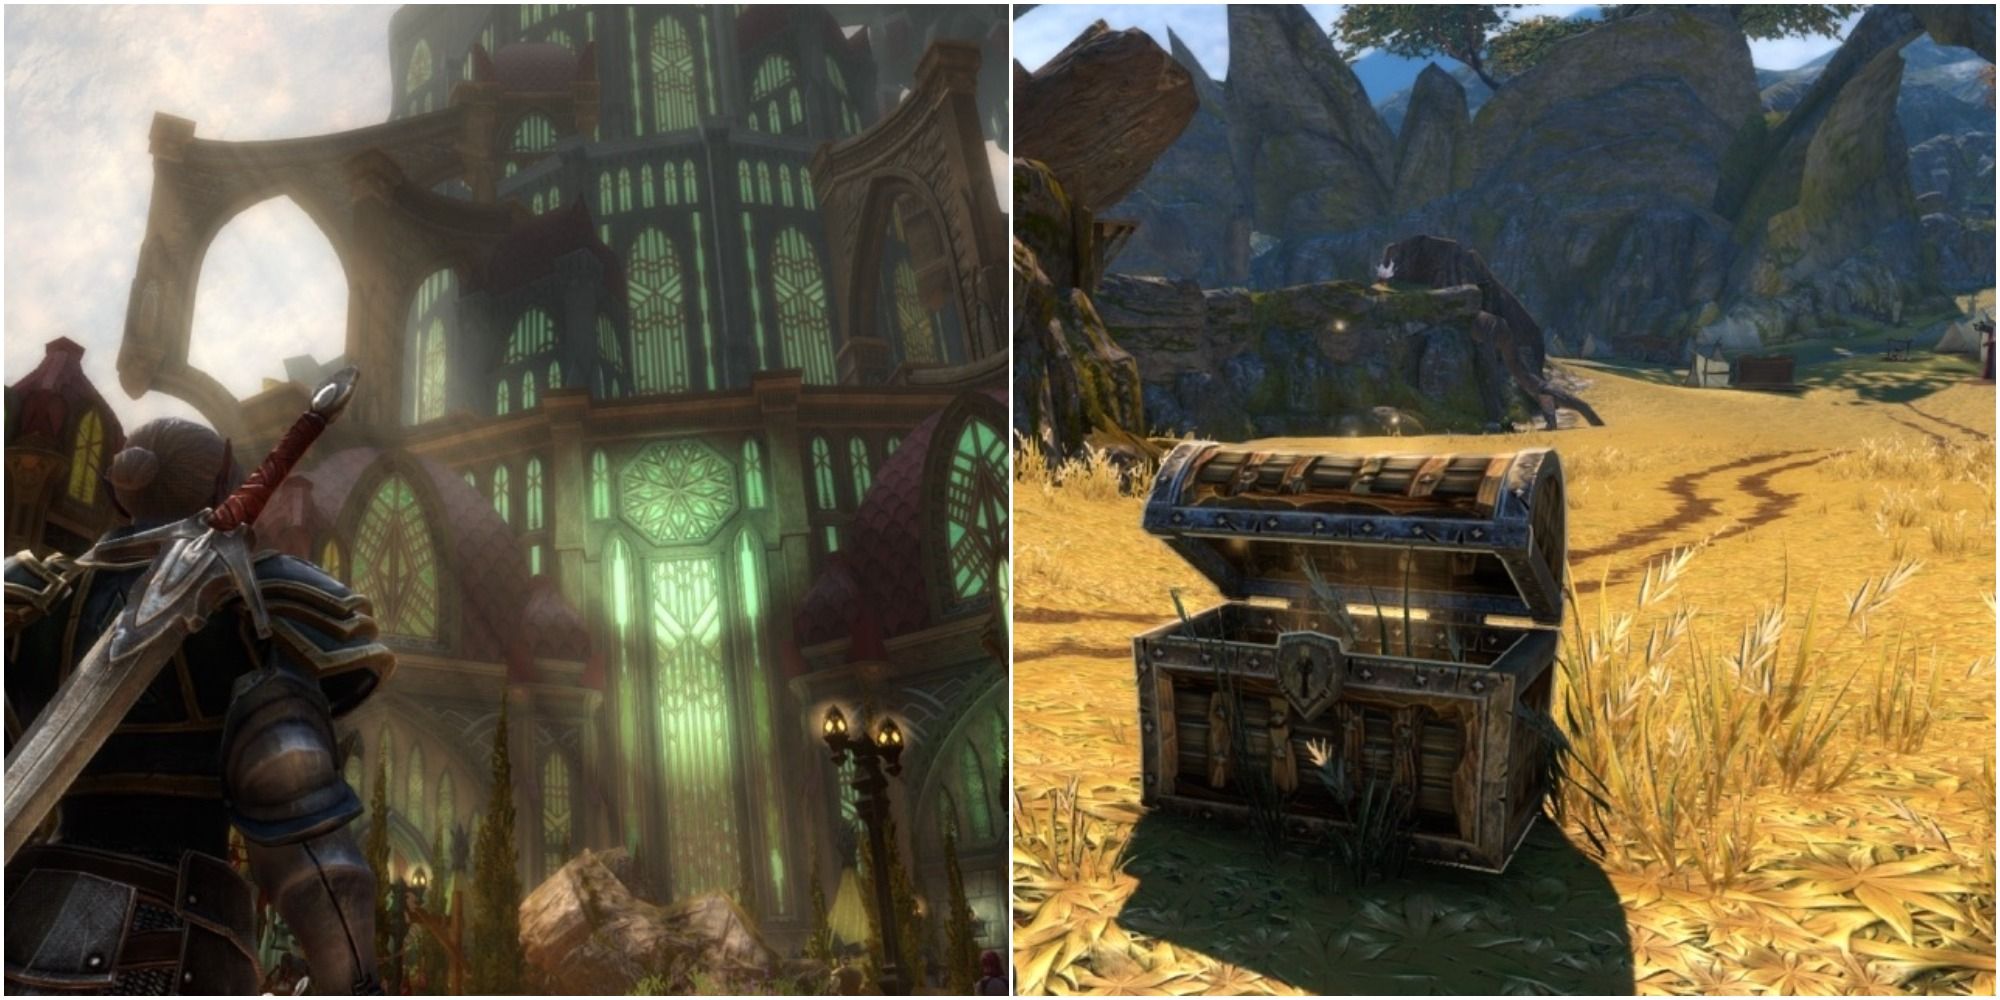 Kingdoms of Amalur City of Rathir overview and locked chest in the plains of erathell